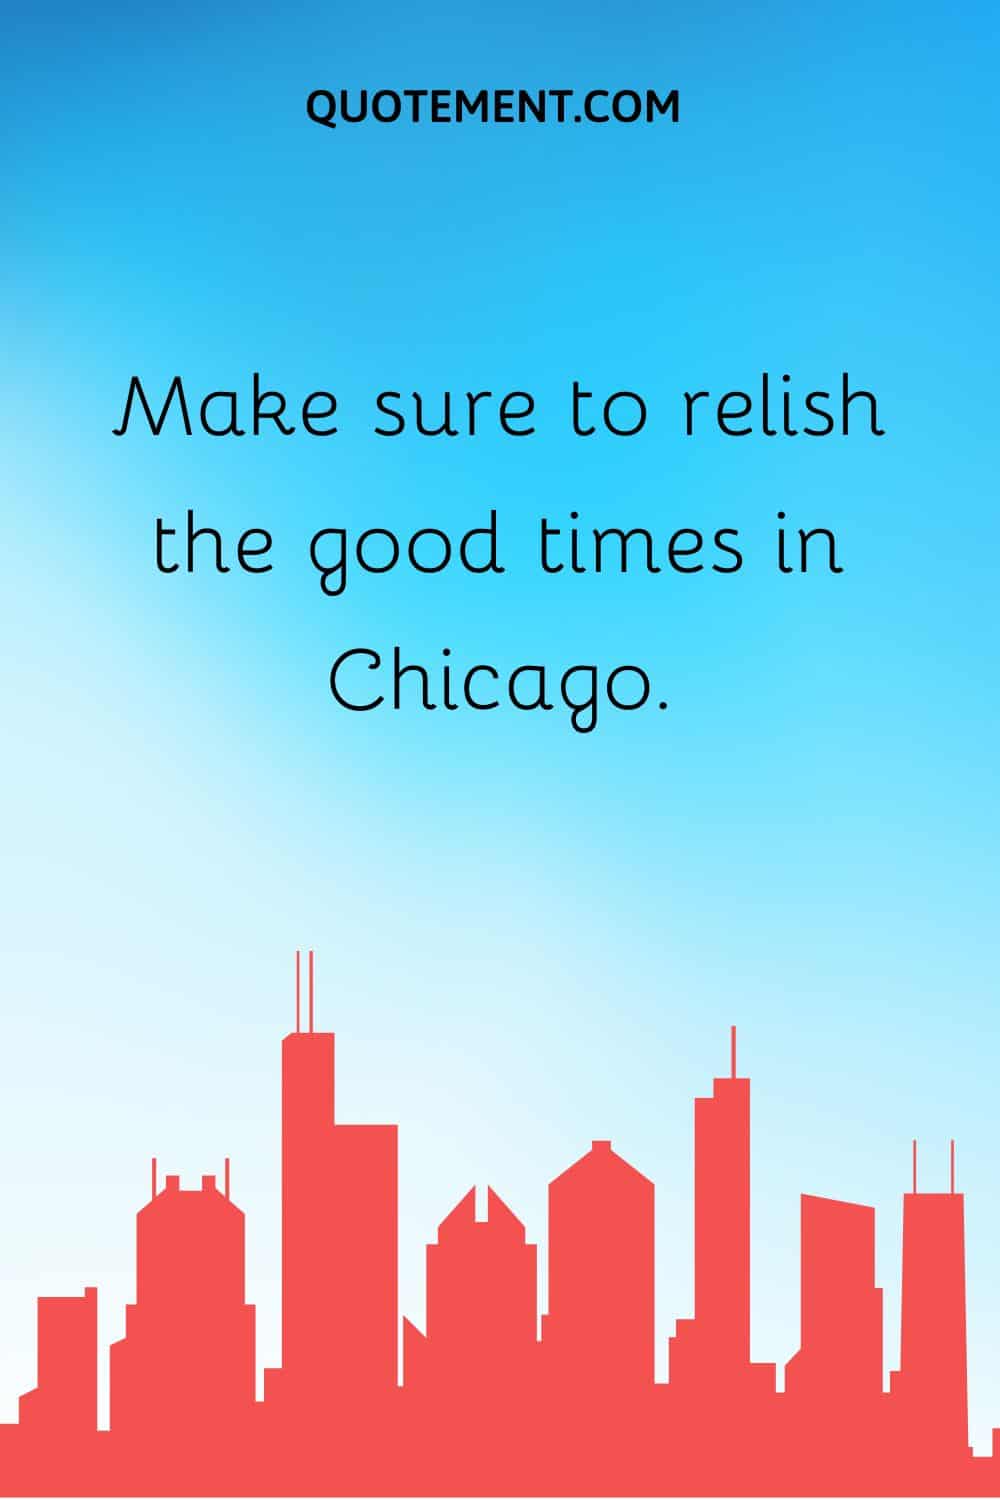 Make sure to relish the good times in Chicago.